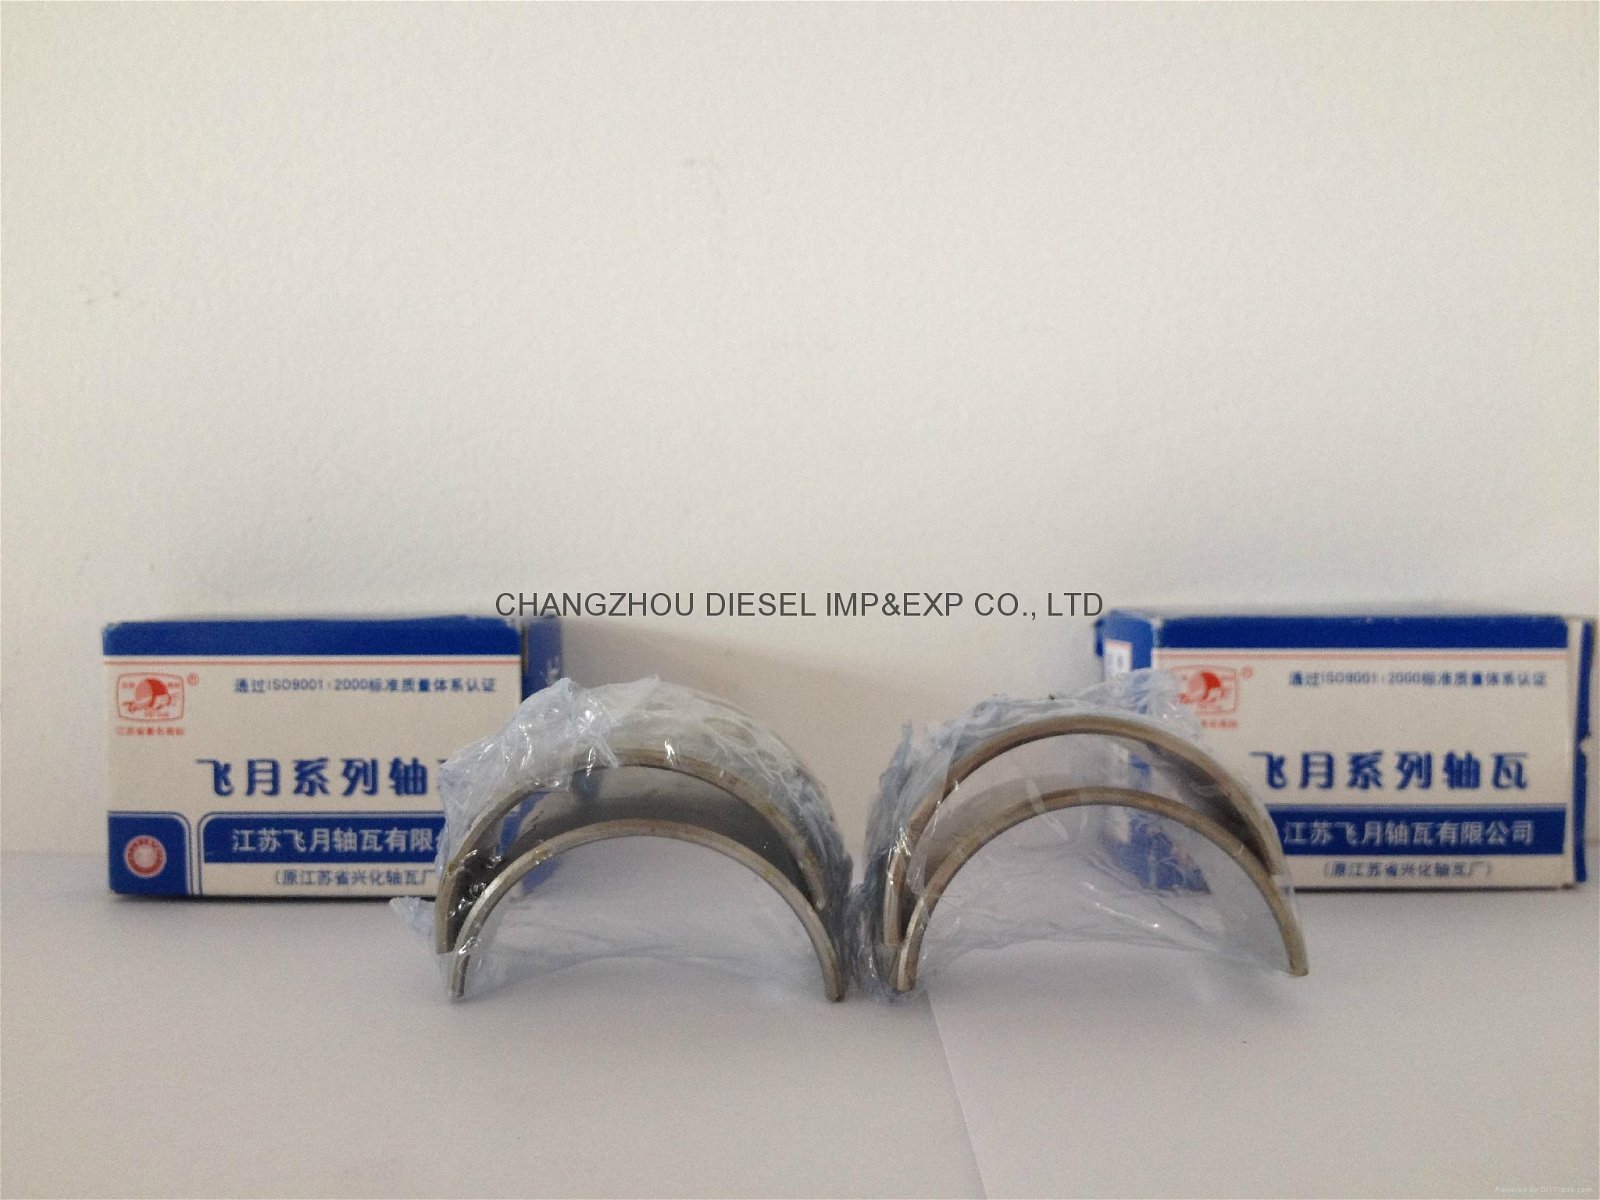 High quality single cylinder diesel engine geneator connecting rod bearing shell 5